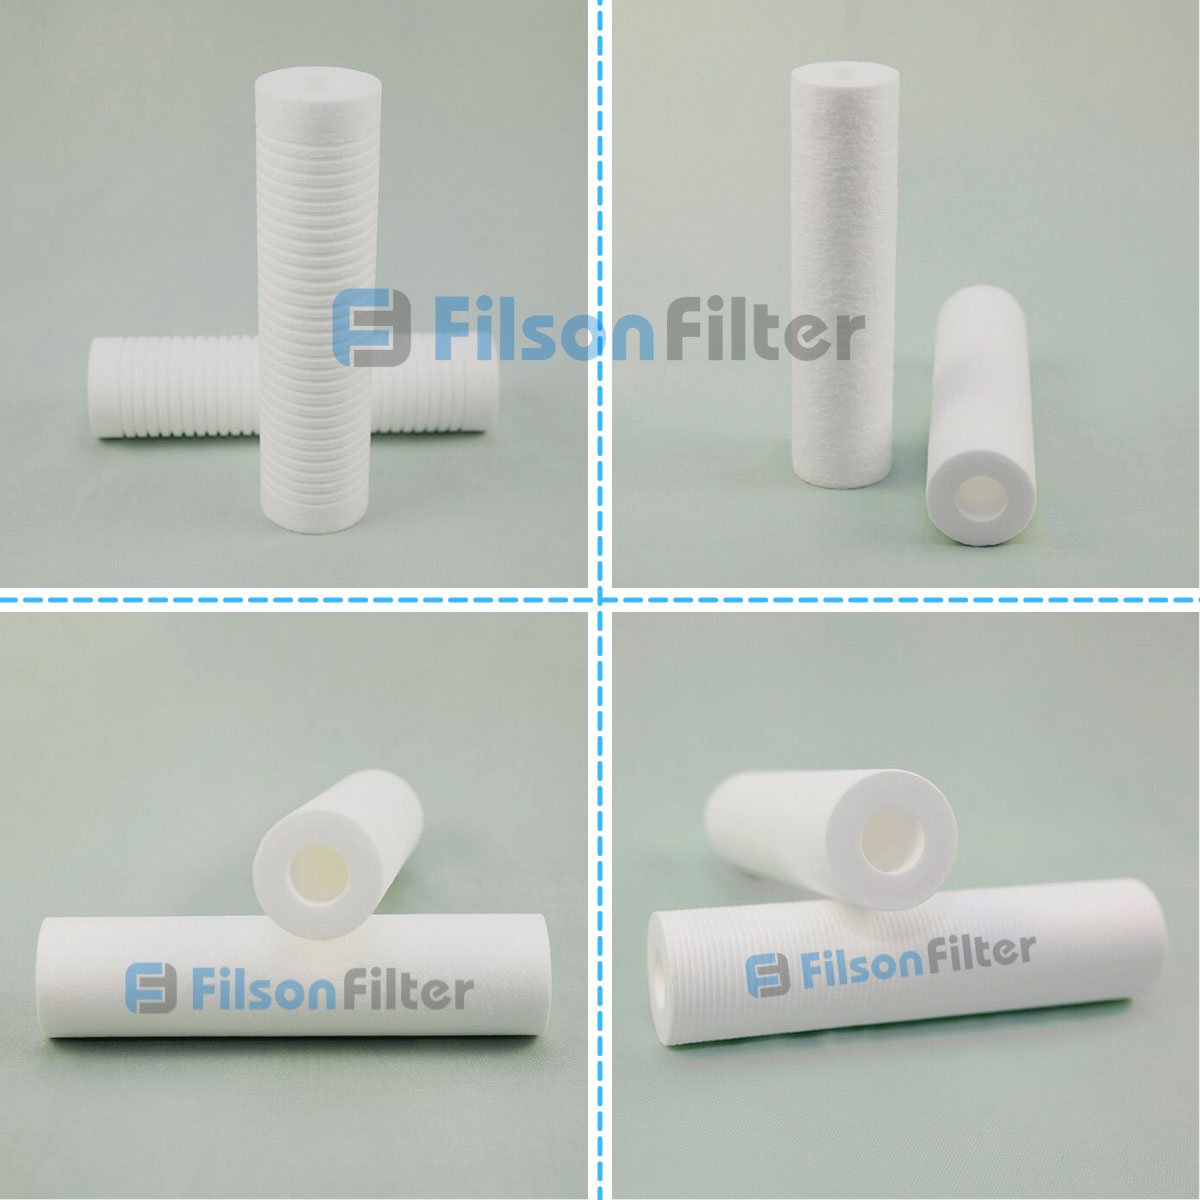 Melt blown PP water filter cartridge size and dimensions